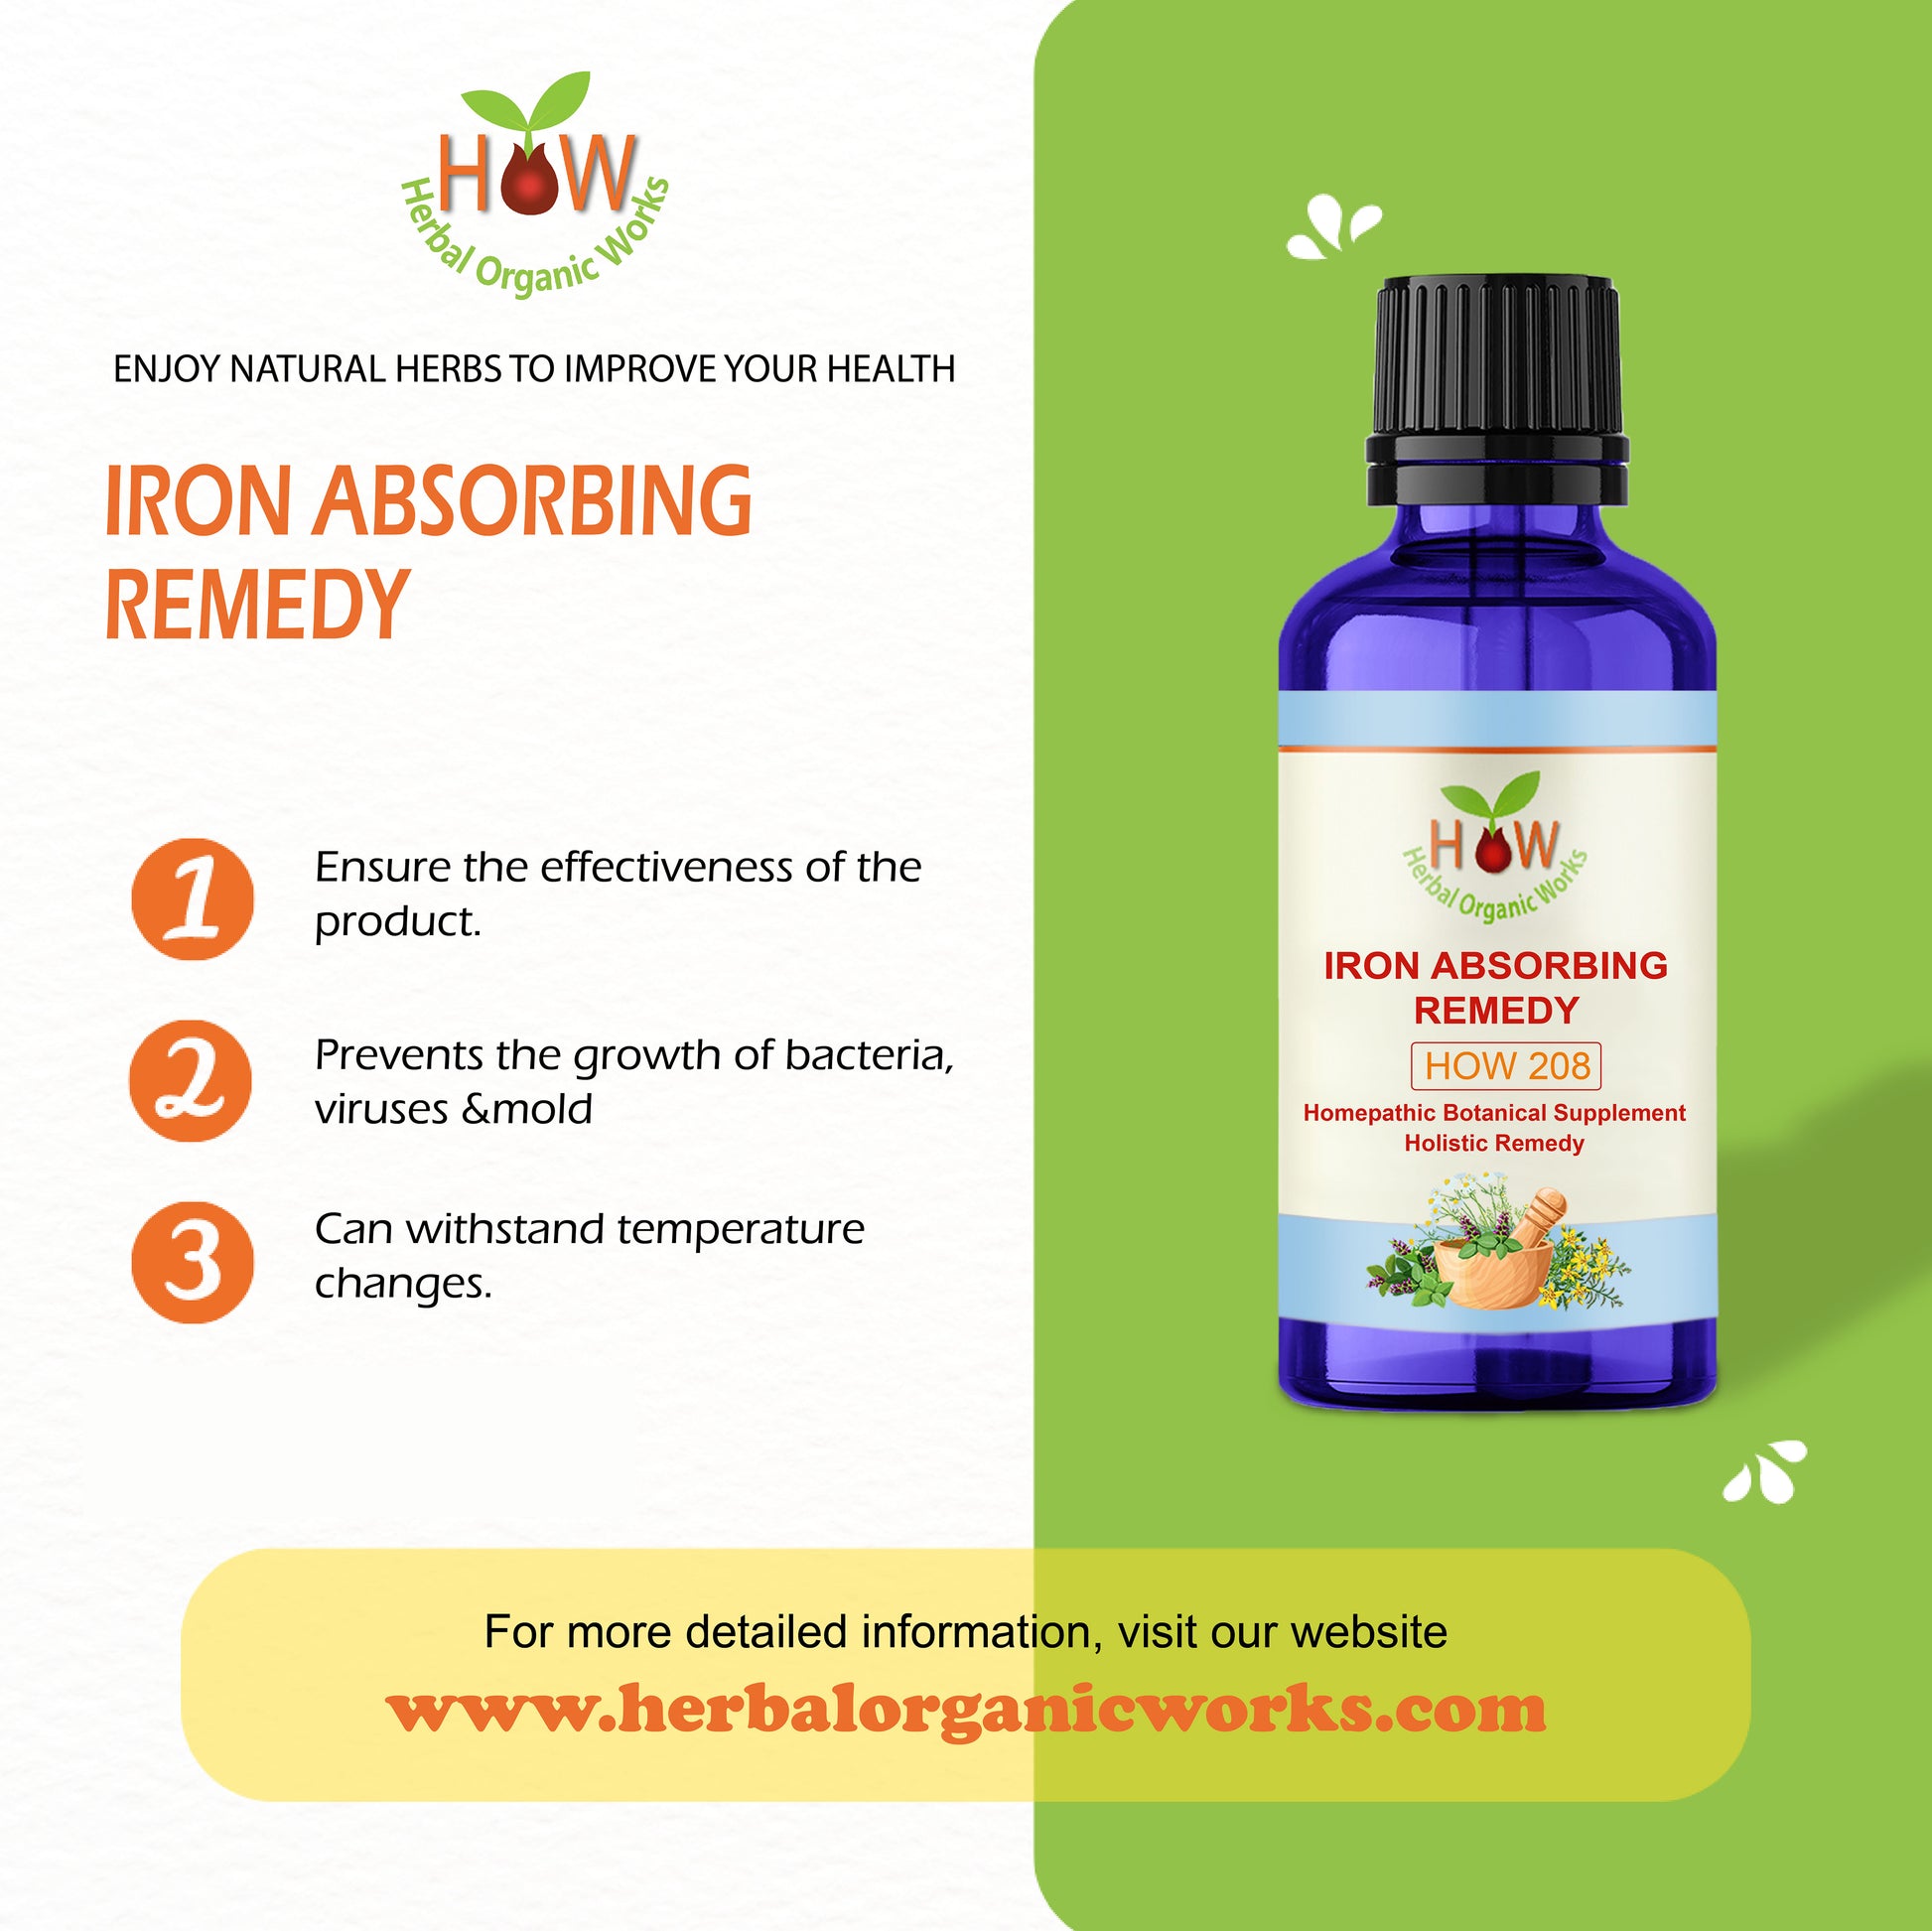 IRON ABSORBING REMEDY FOR ANEMIA (HOW208)